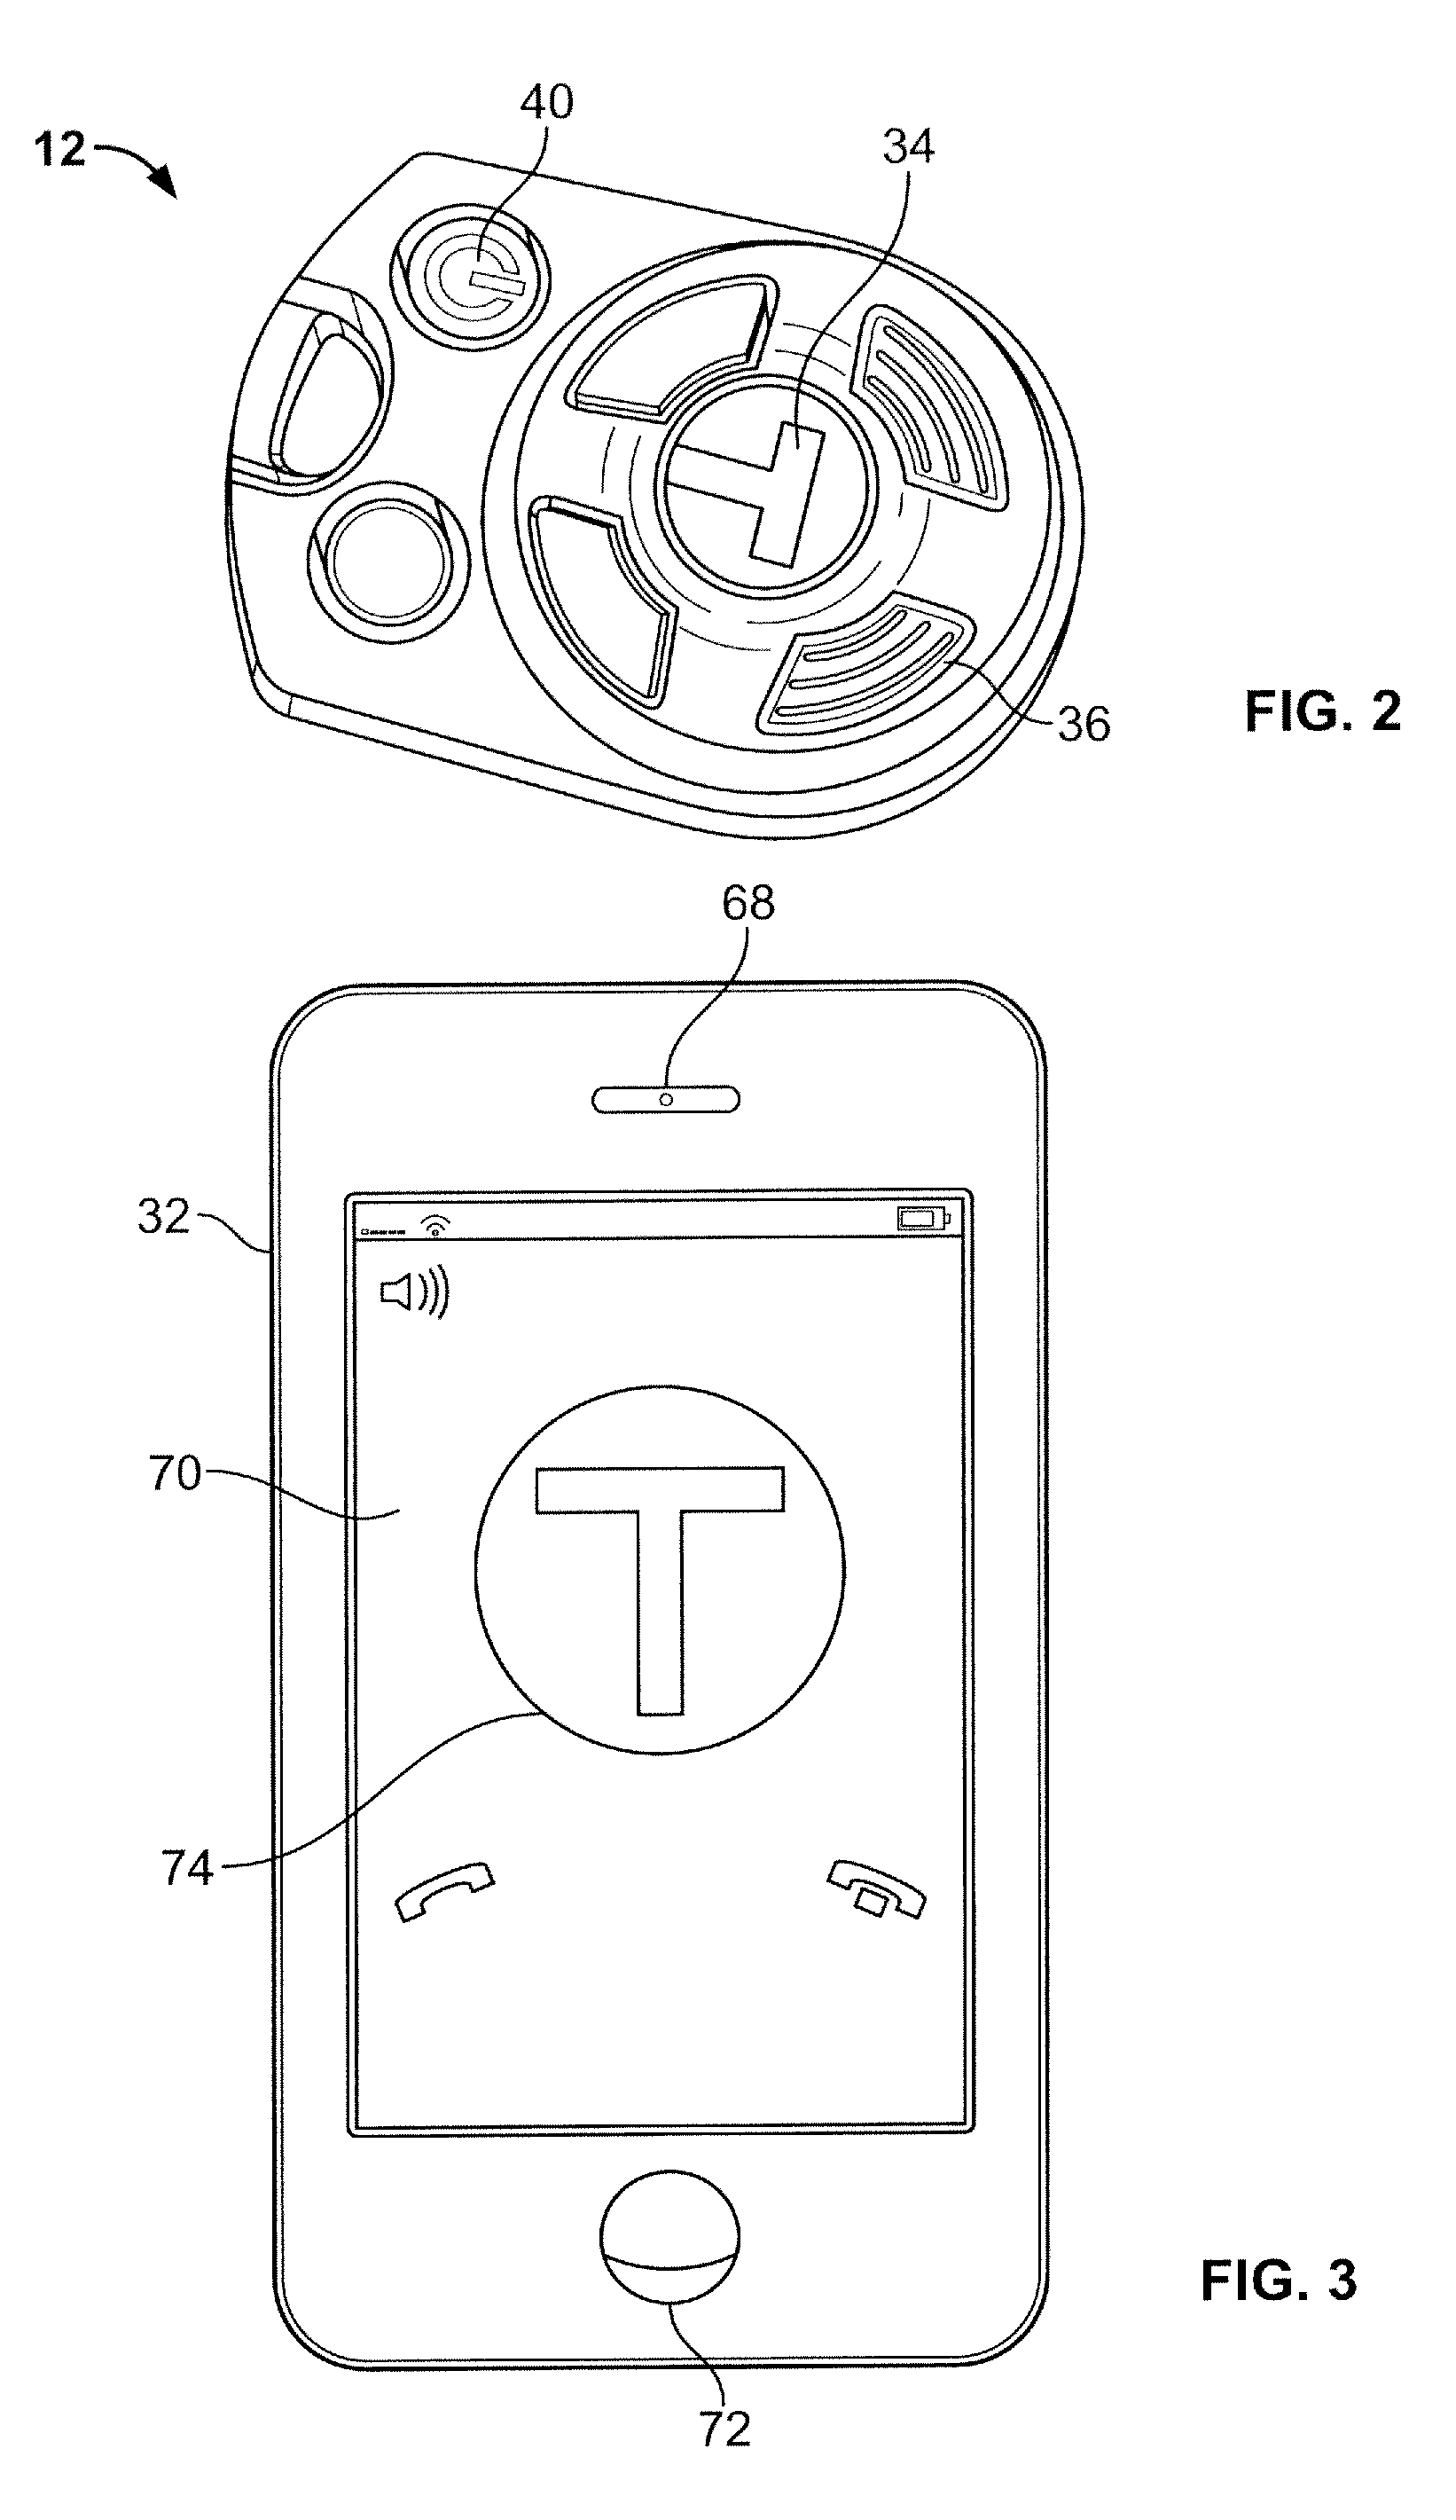 System and method for identifying, providing, and presenting supplemental content on a mobile device